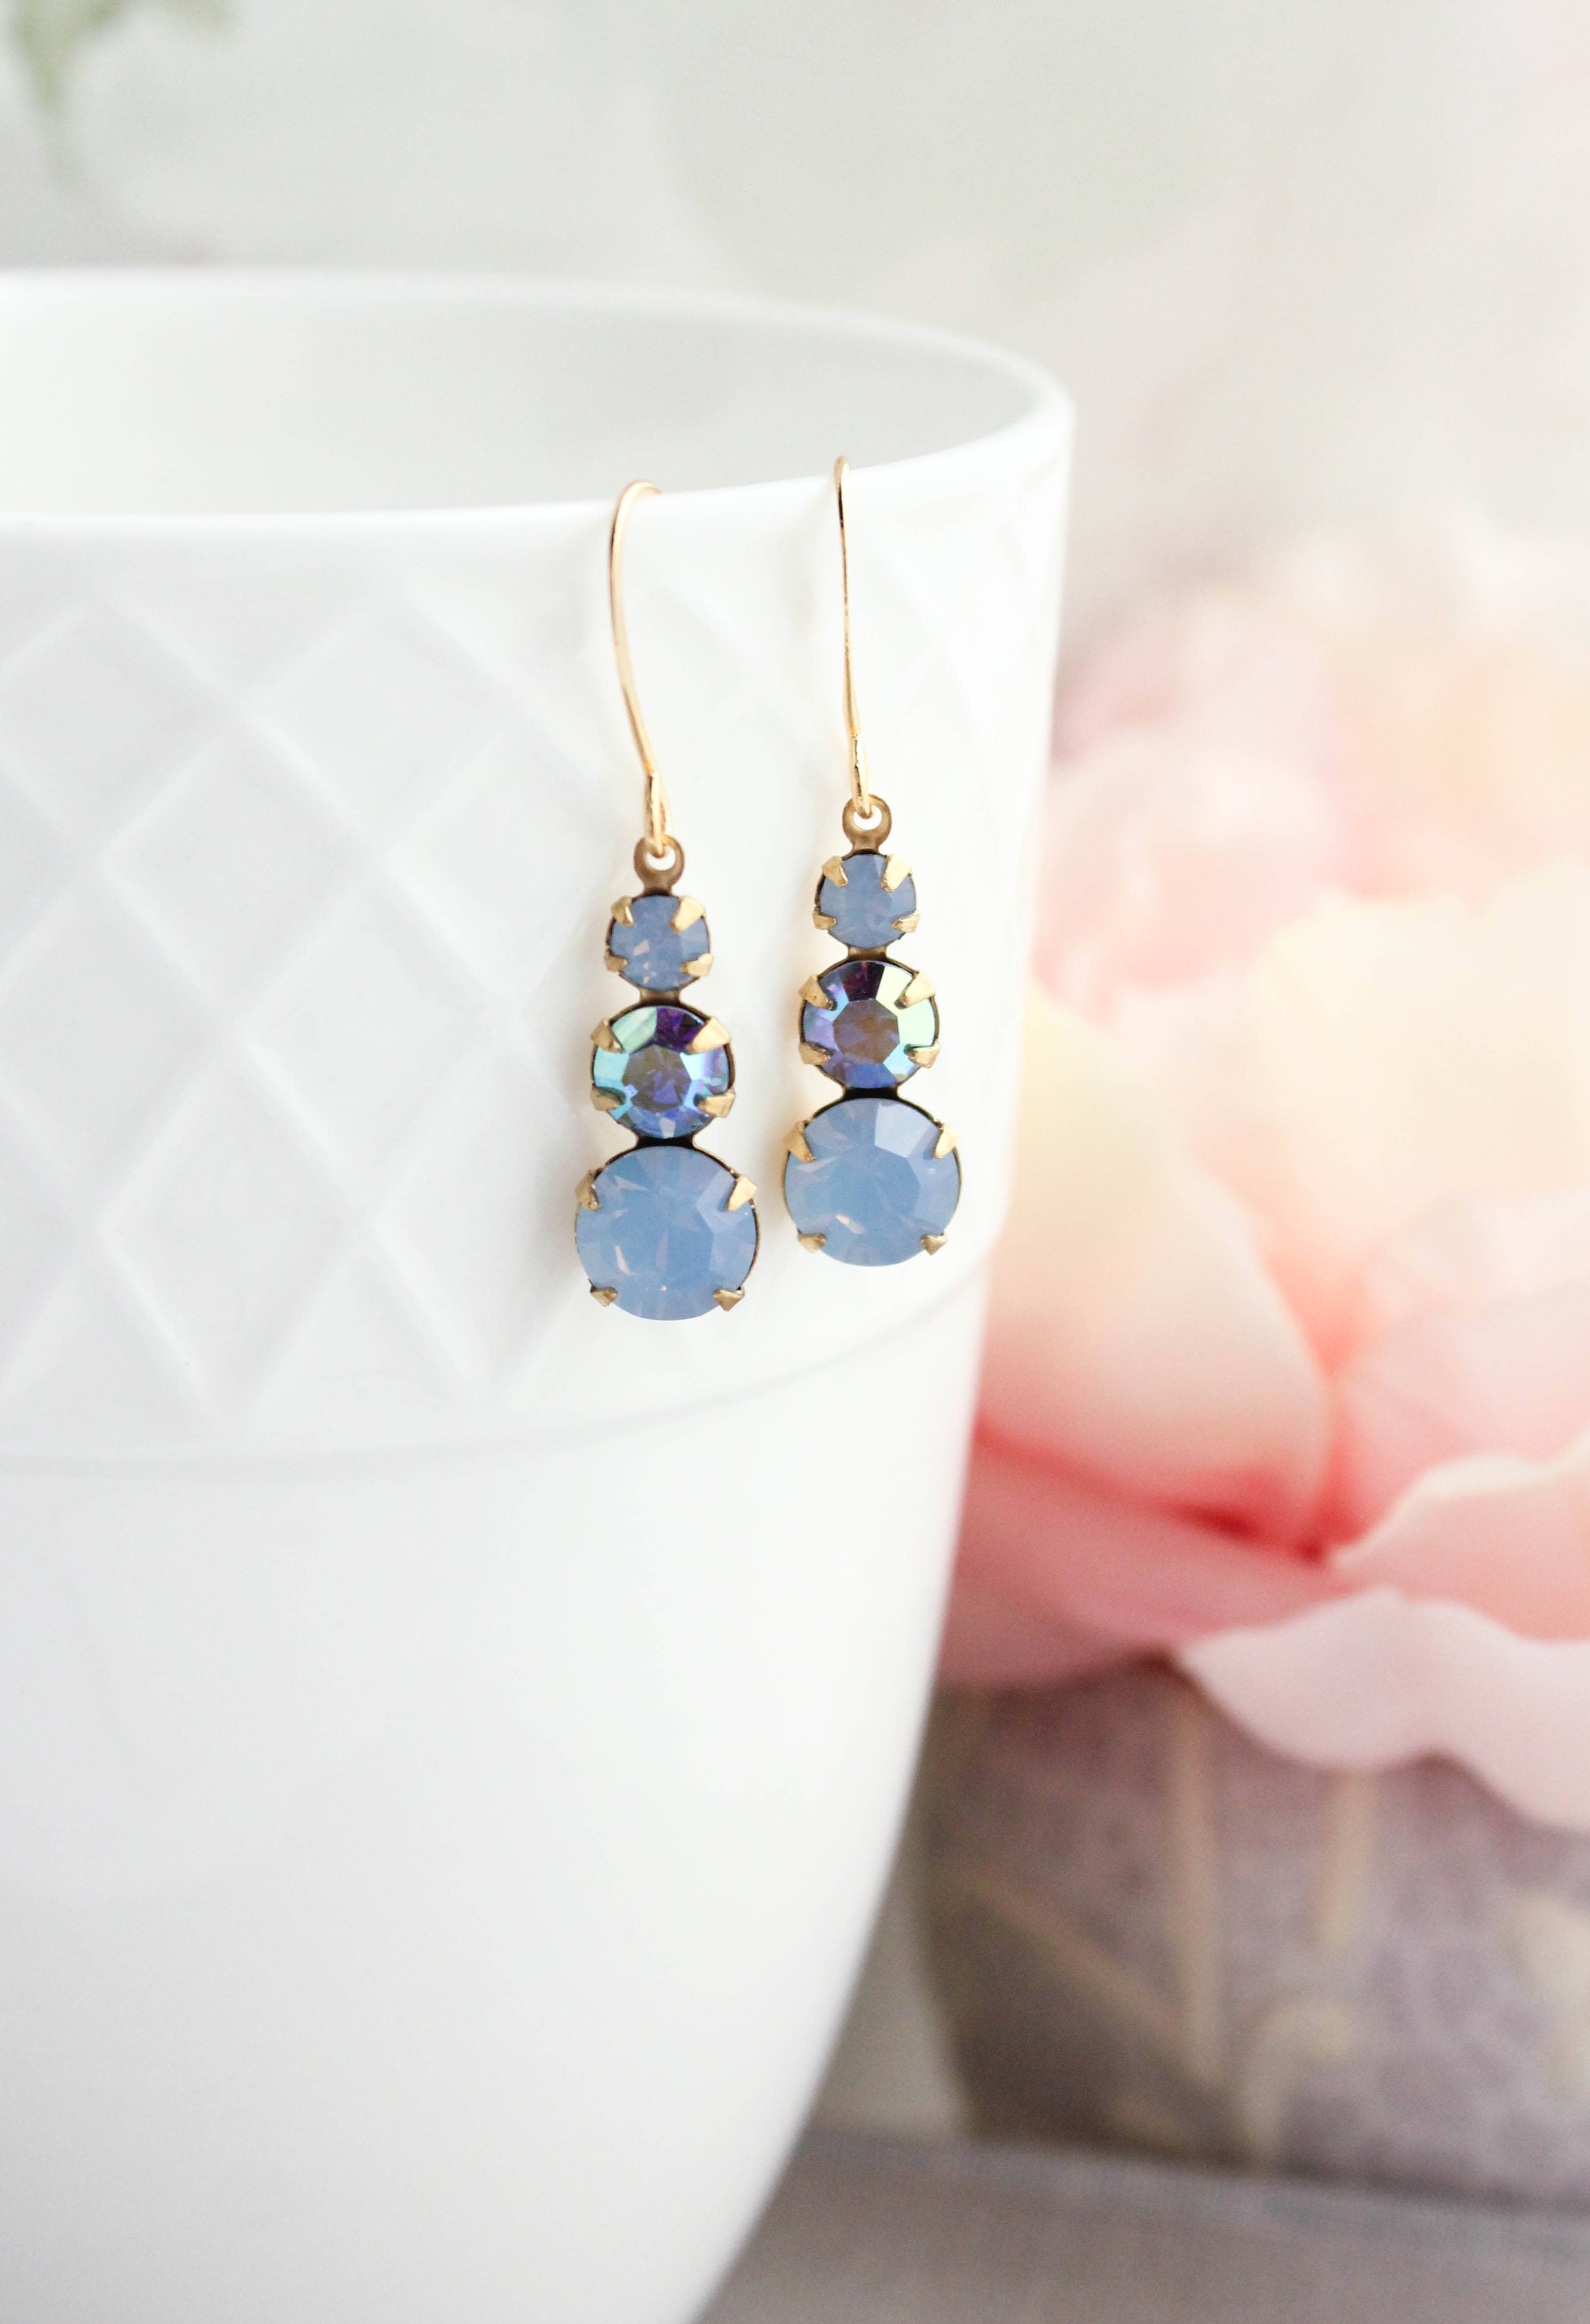 Vintage Glass Earrings -Three Jewel - Shades of Blue - Out of the Blue